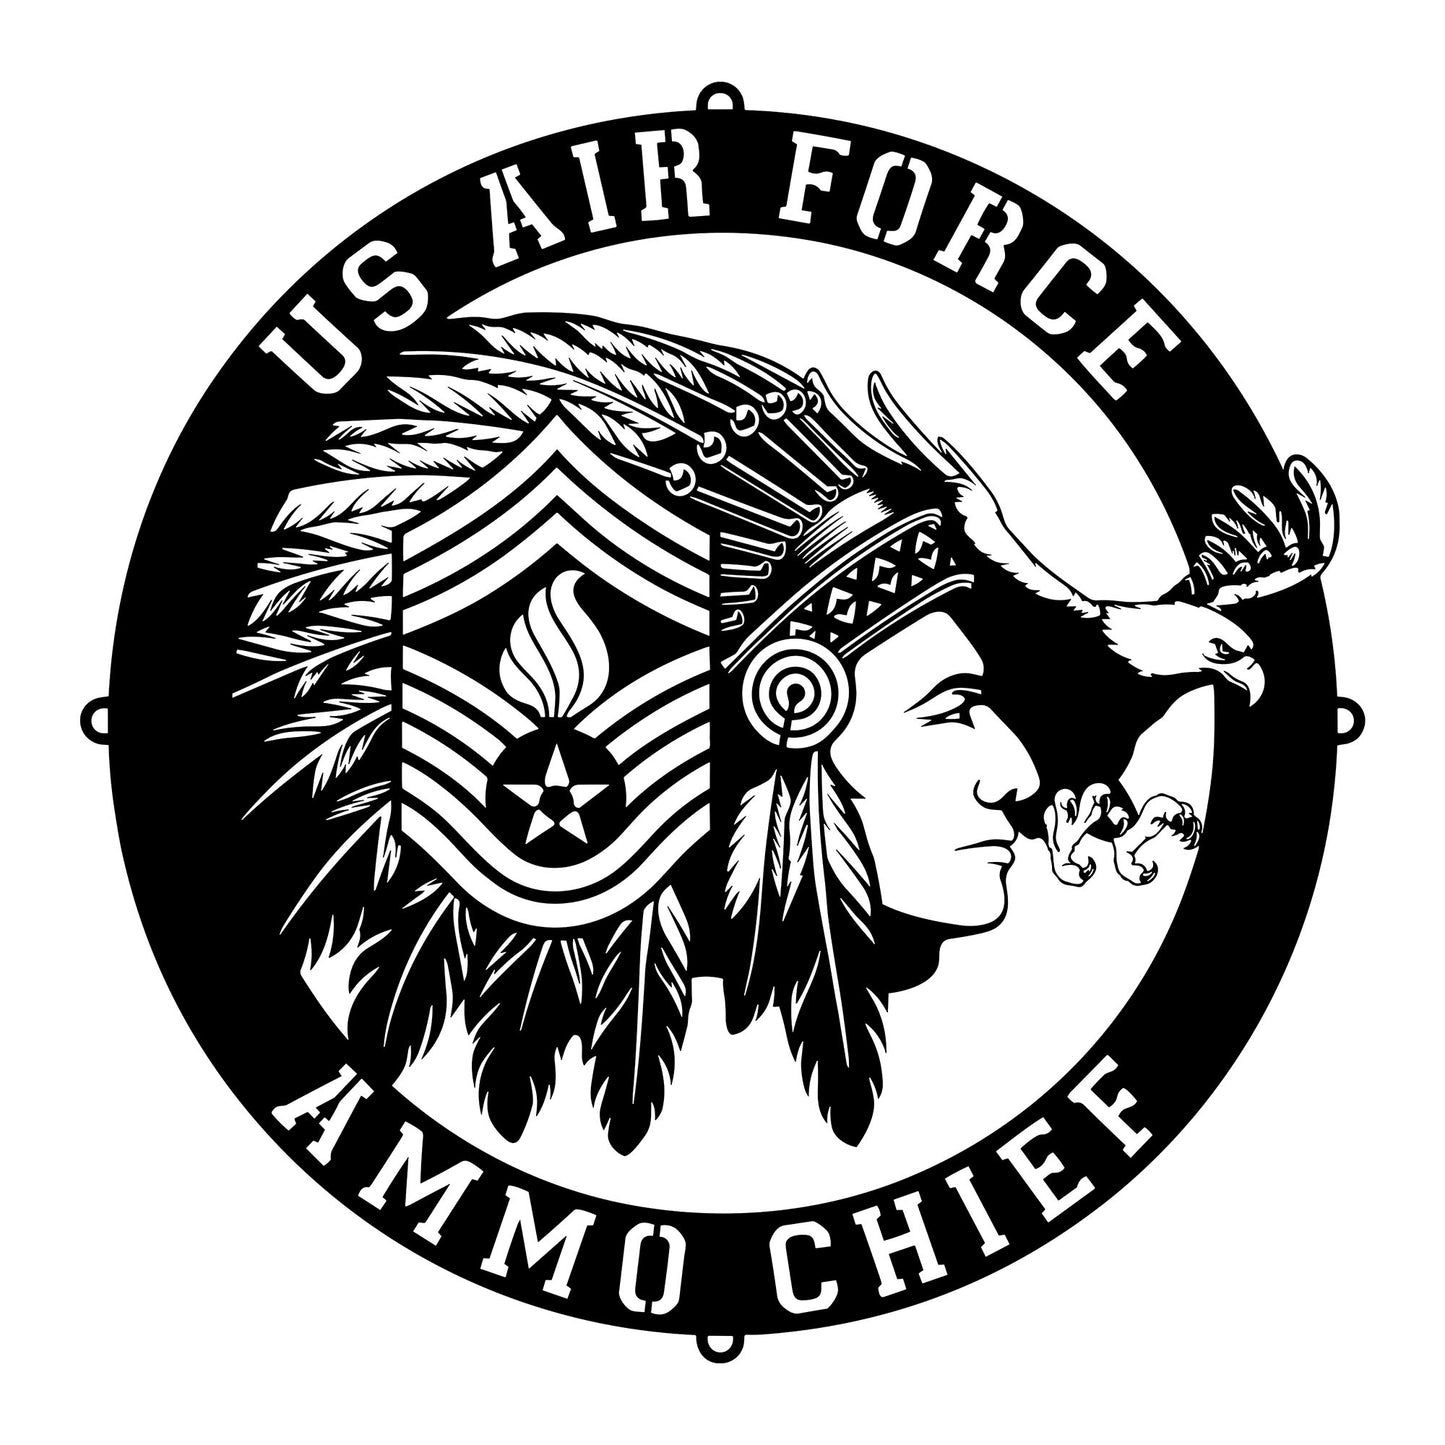 USAF AMMO Chief (Male Silhouette) Headdress Stripes Pisspot Eagle Die Cut Revised Hanging Metal Wall Sign